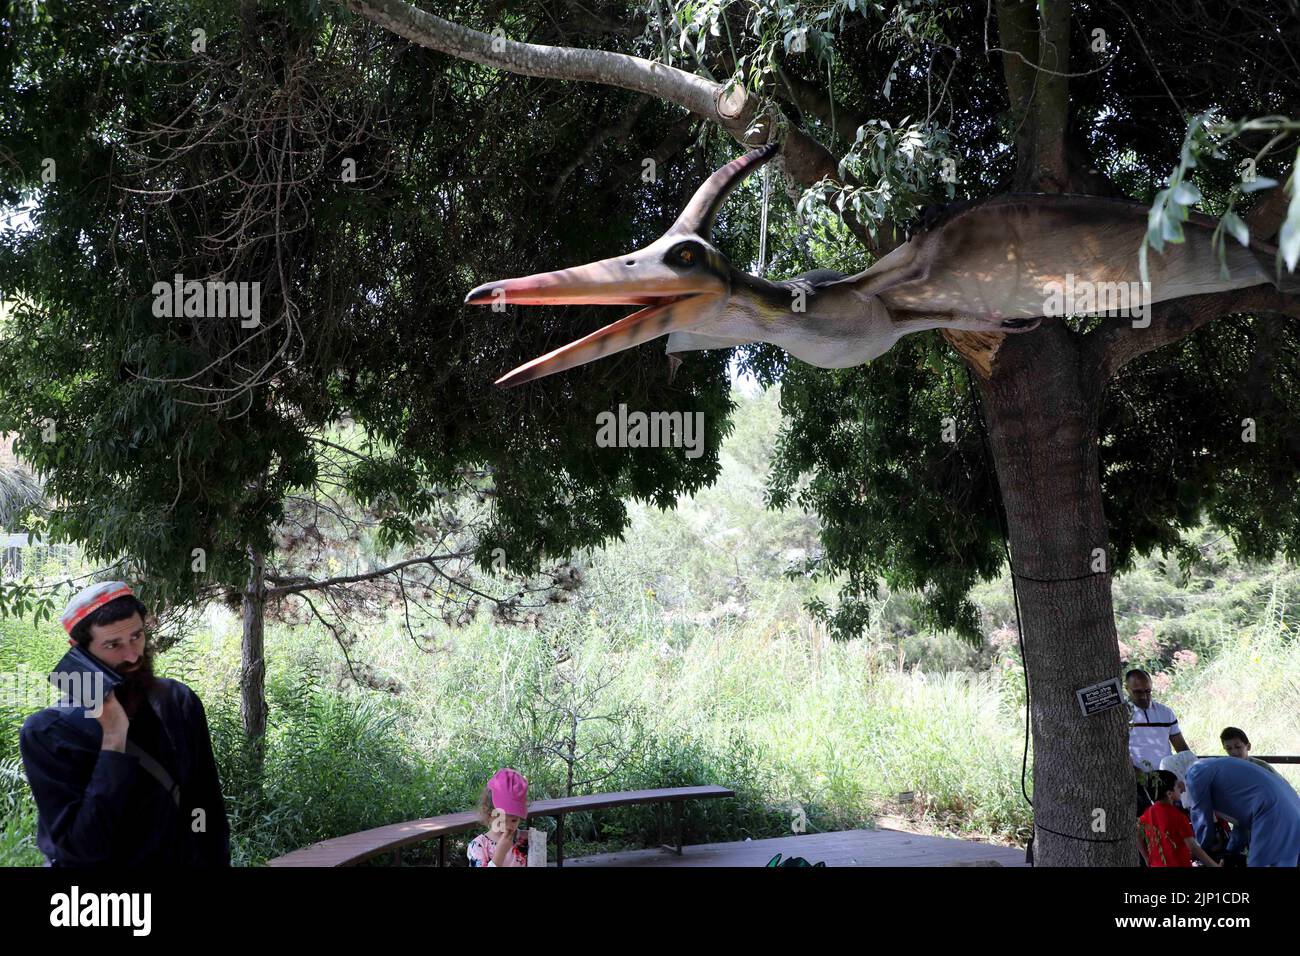 Jerusalem. 14th Aug, 2022. People visit an exhibition of model dinosaurs at a botanical garden in Jerusalem, Aug. 14, 2022. Credit: Gil Cohen Magen/Xinhua/Alamy Live News Stock Photo